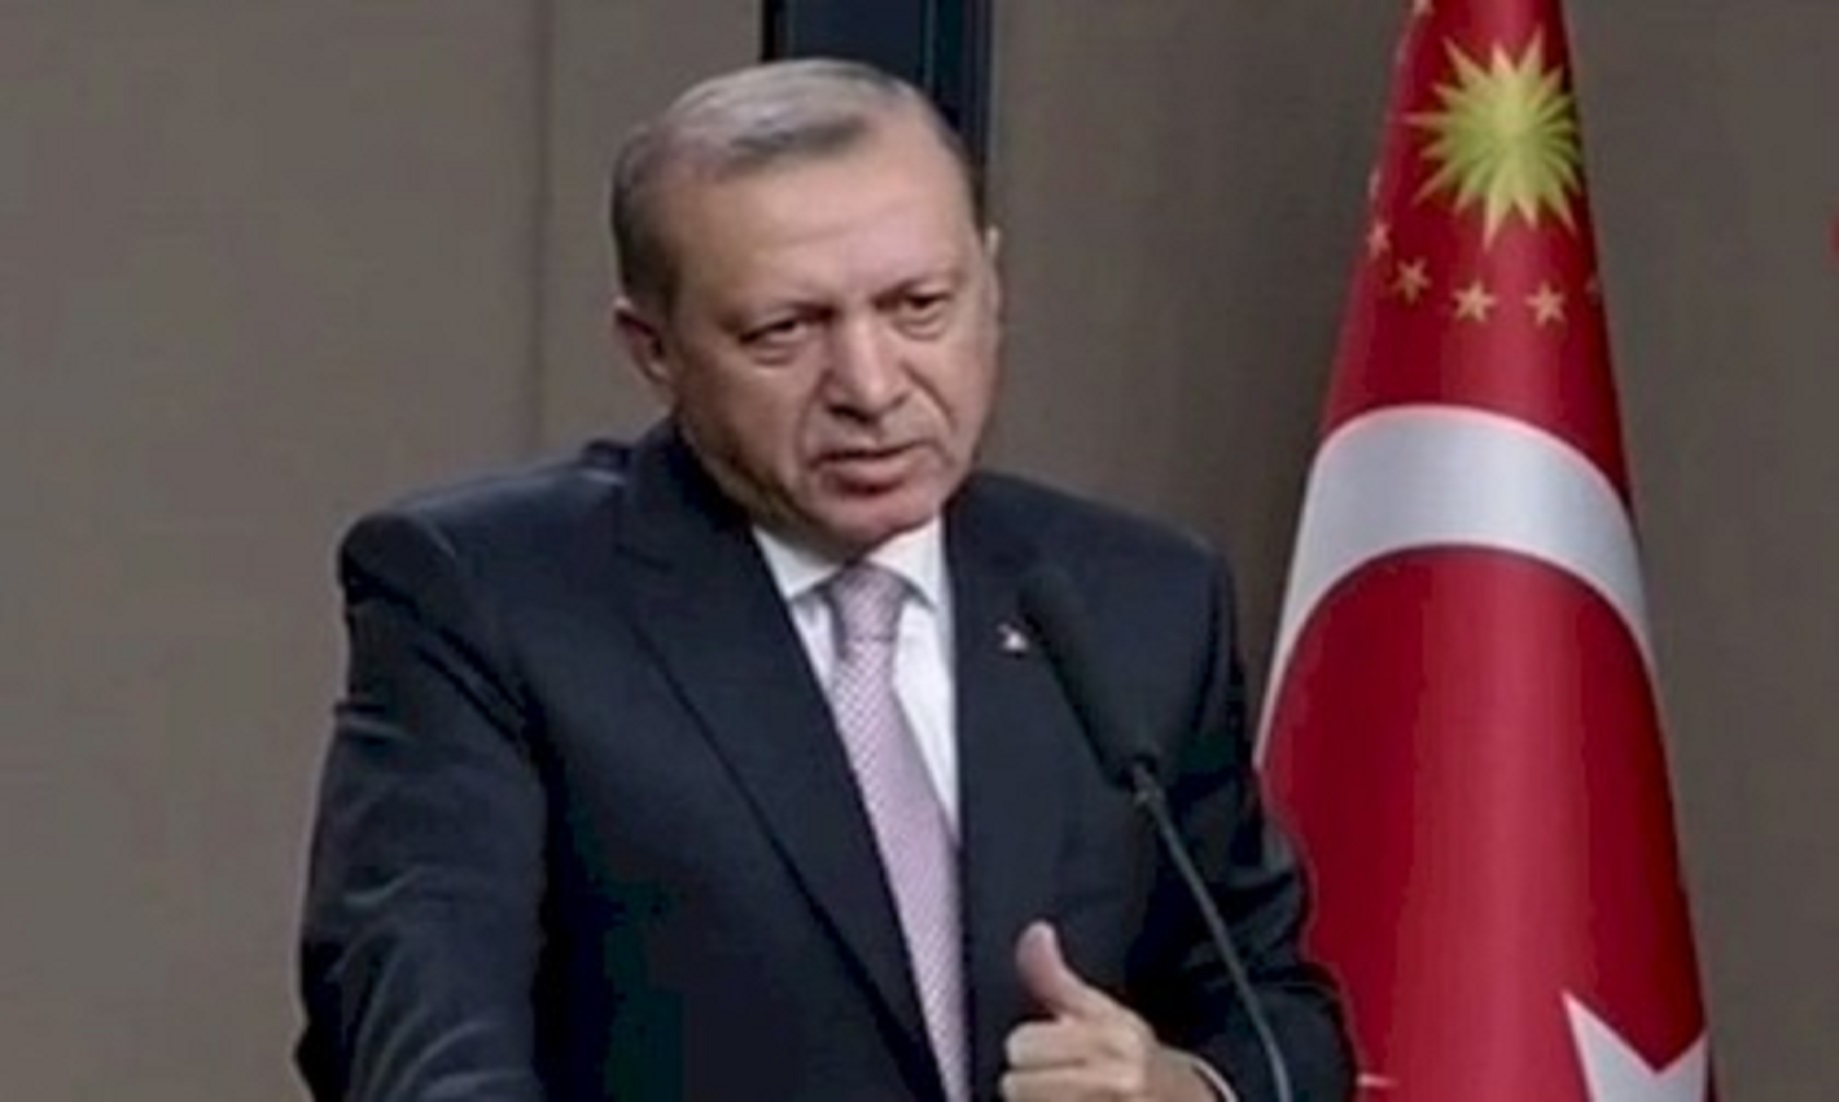 Erdogan Slams Syria For Not Complying With Cease-Fire